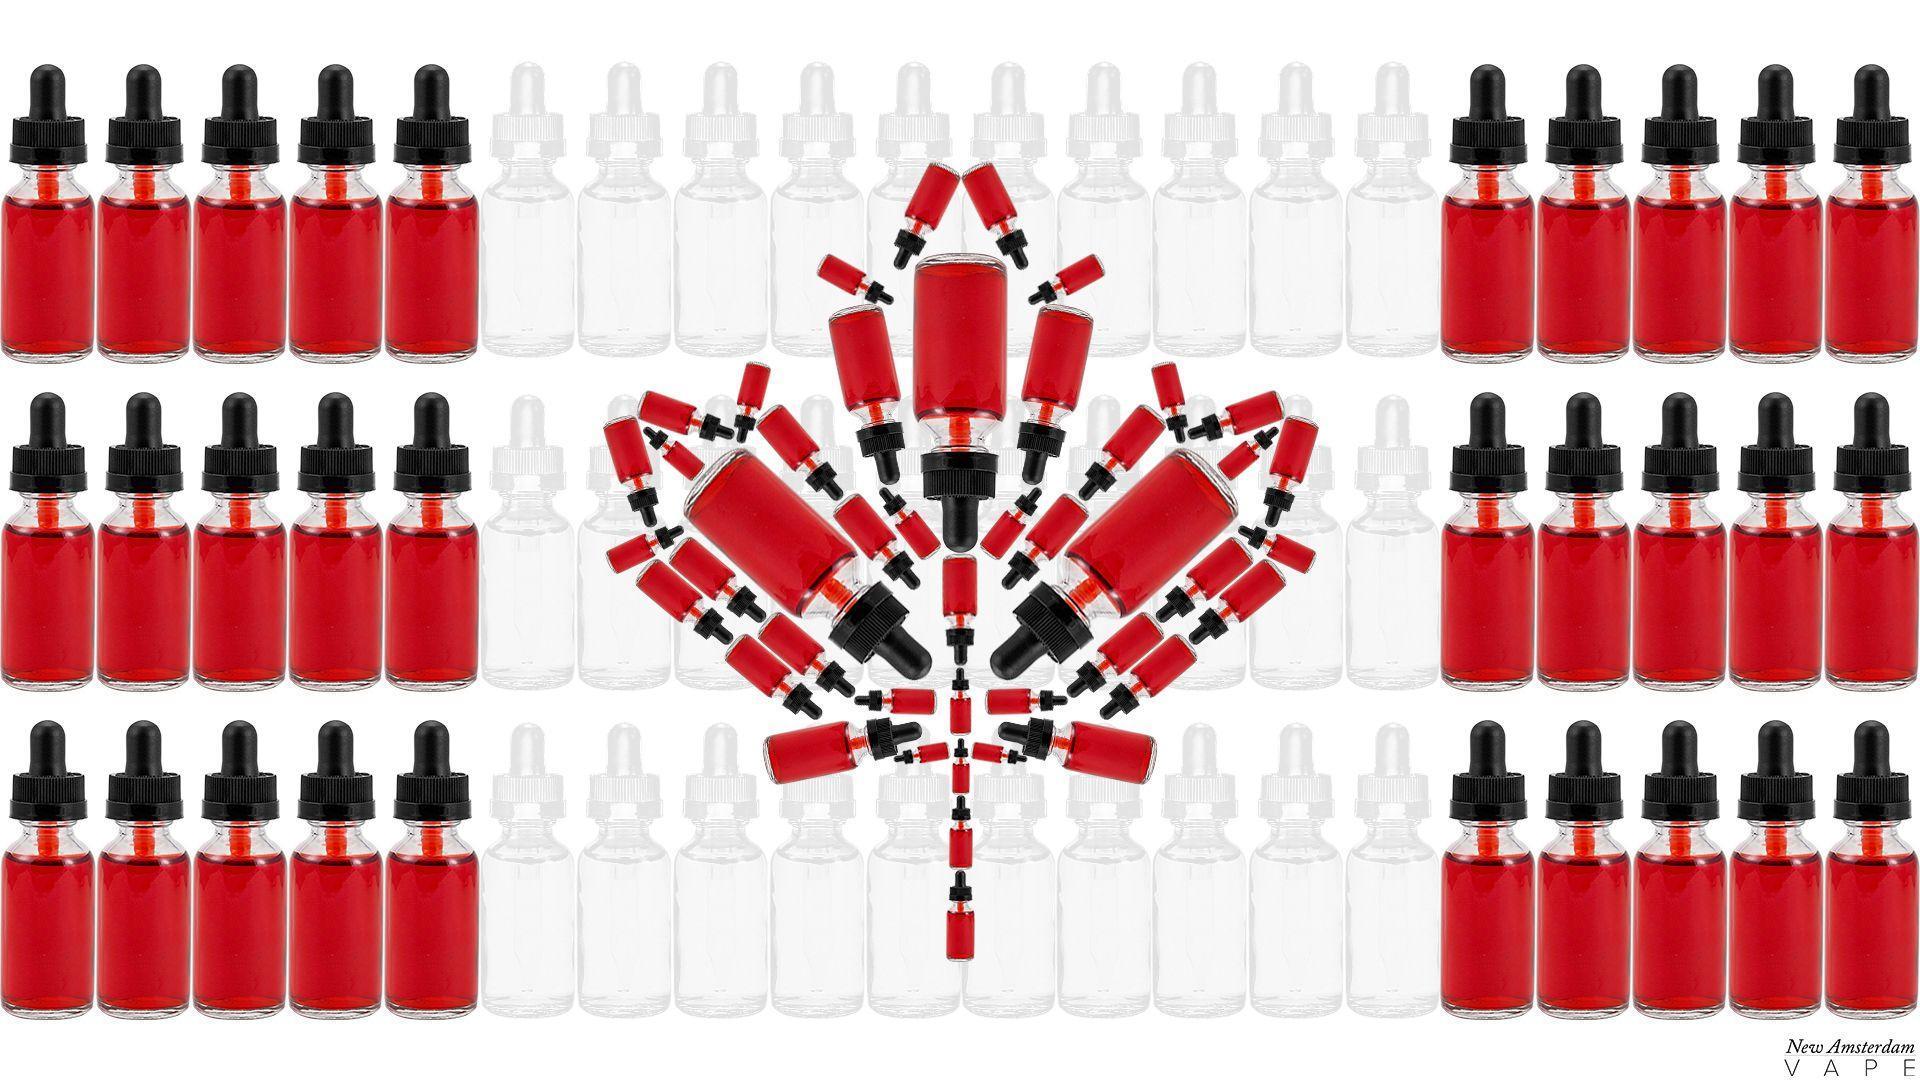 4th Of July And Canada Day E Liquid Bottle Wallpaper. New